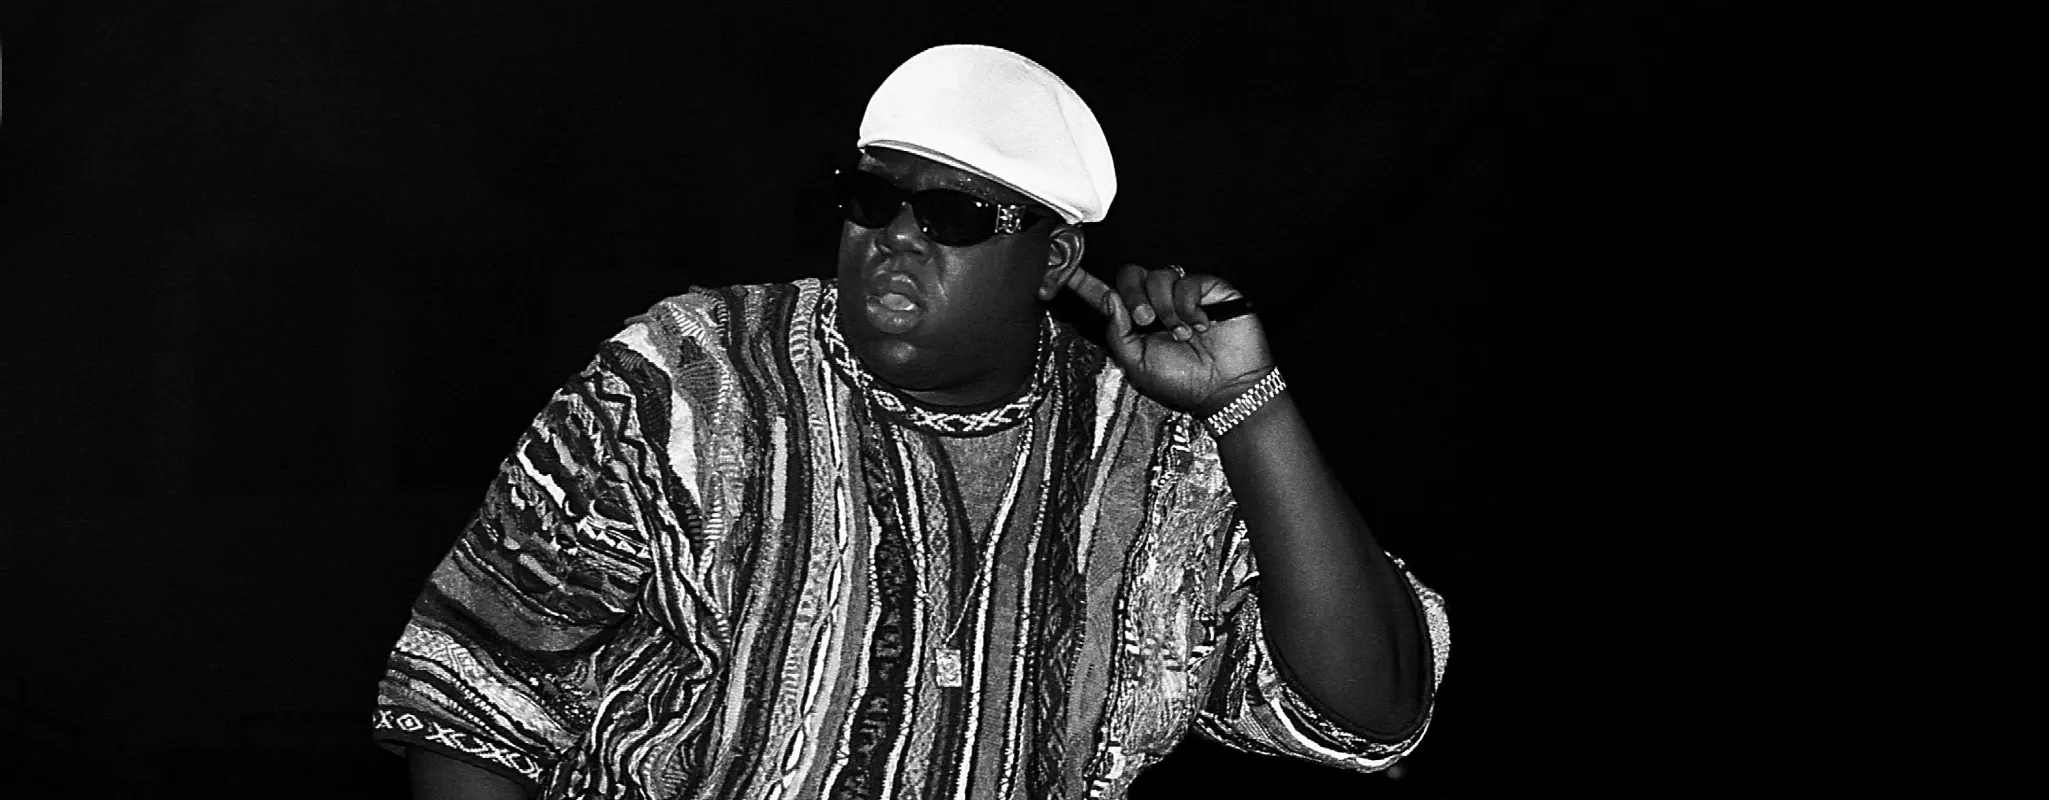 The Best 15 Notorious B.I.G. Quotes